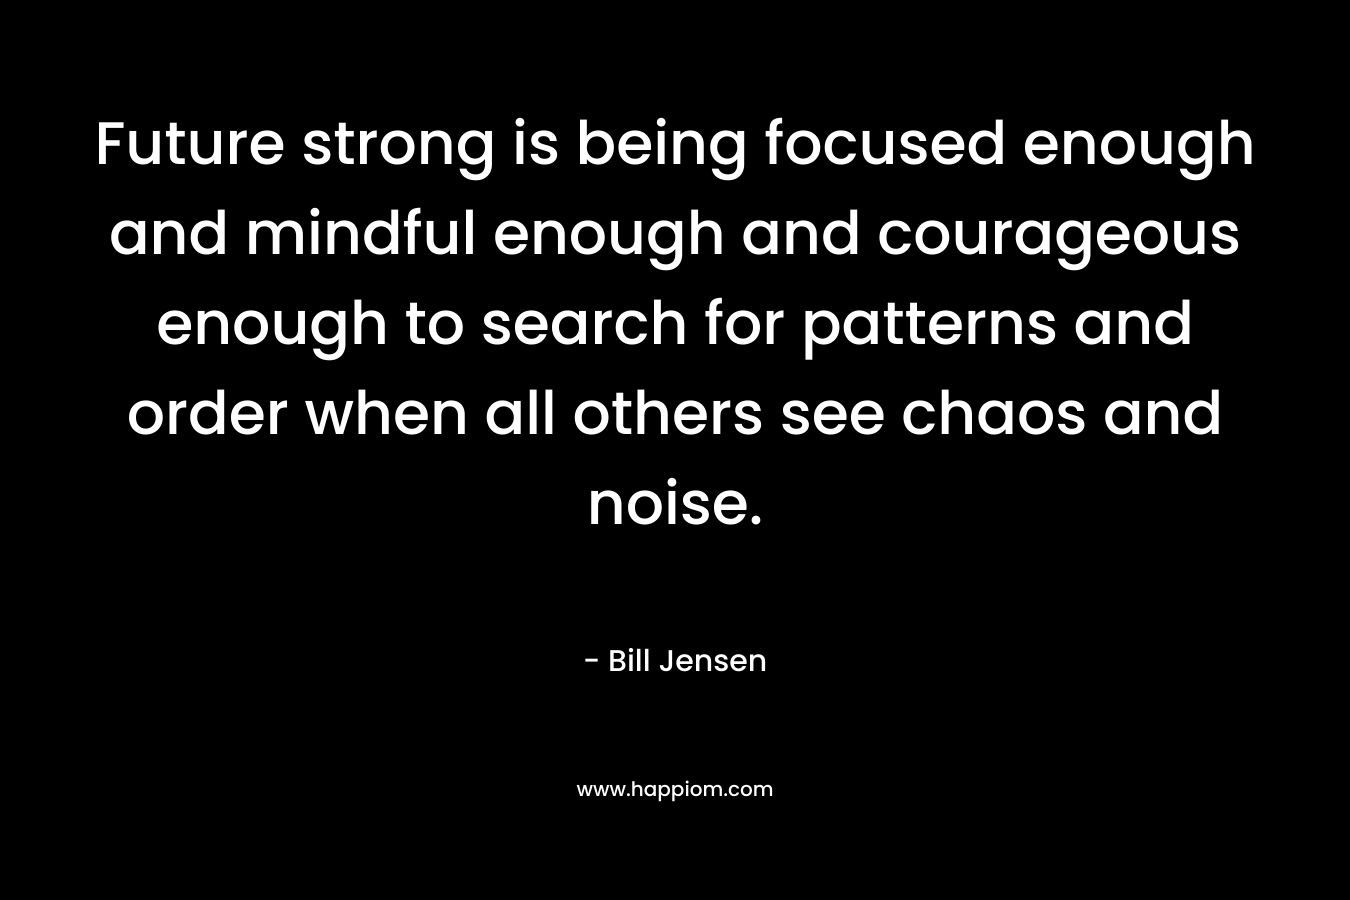 Future strong is being focused enough and mindful enough and courageous enough to search for patterns and order when all others see chaos and noise.